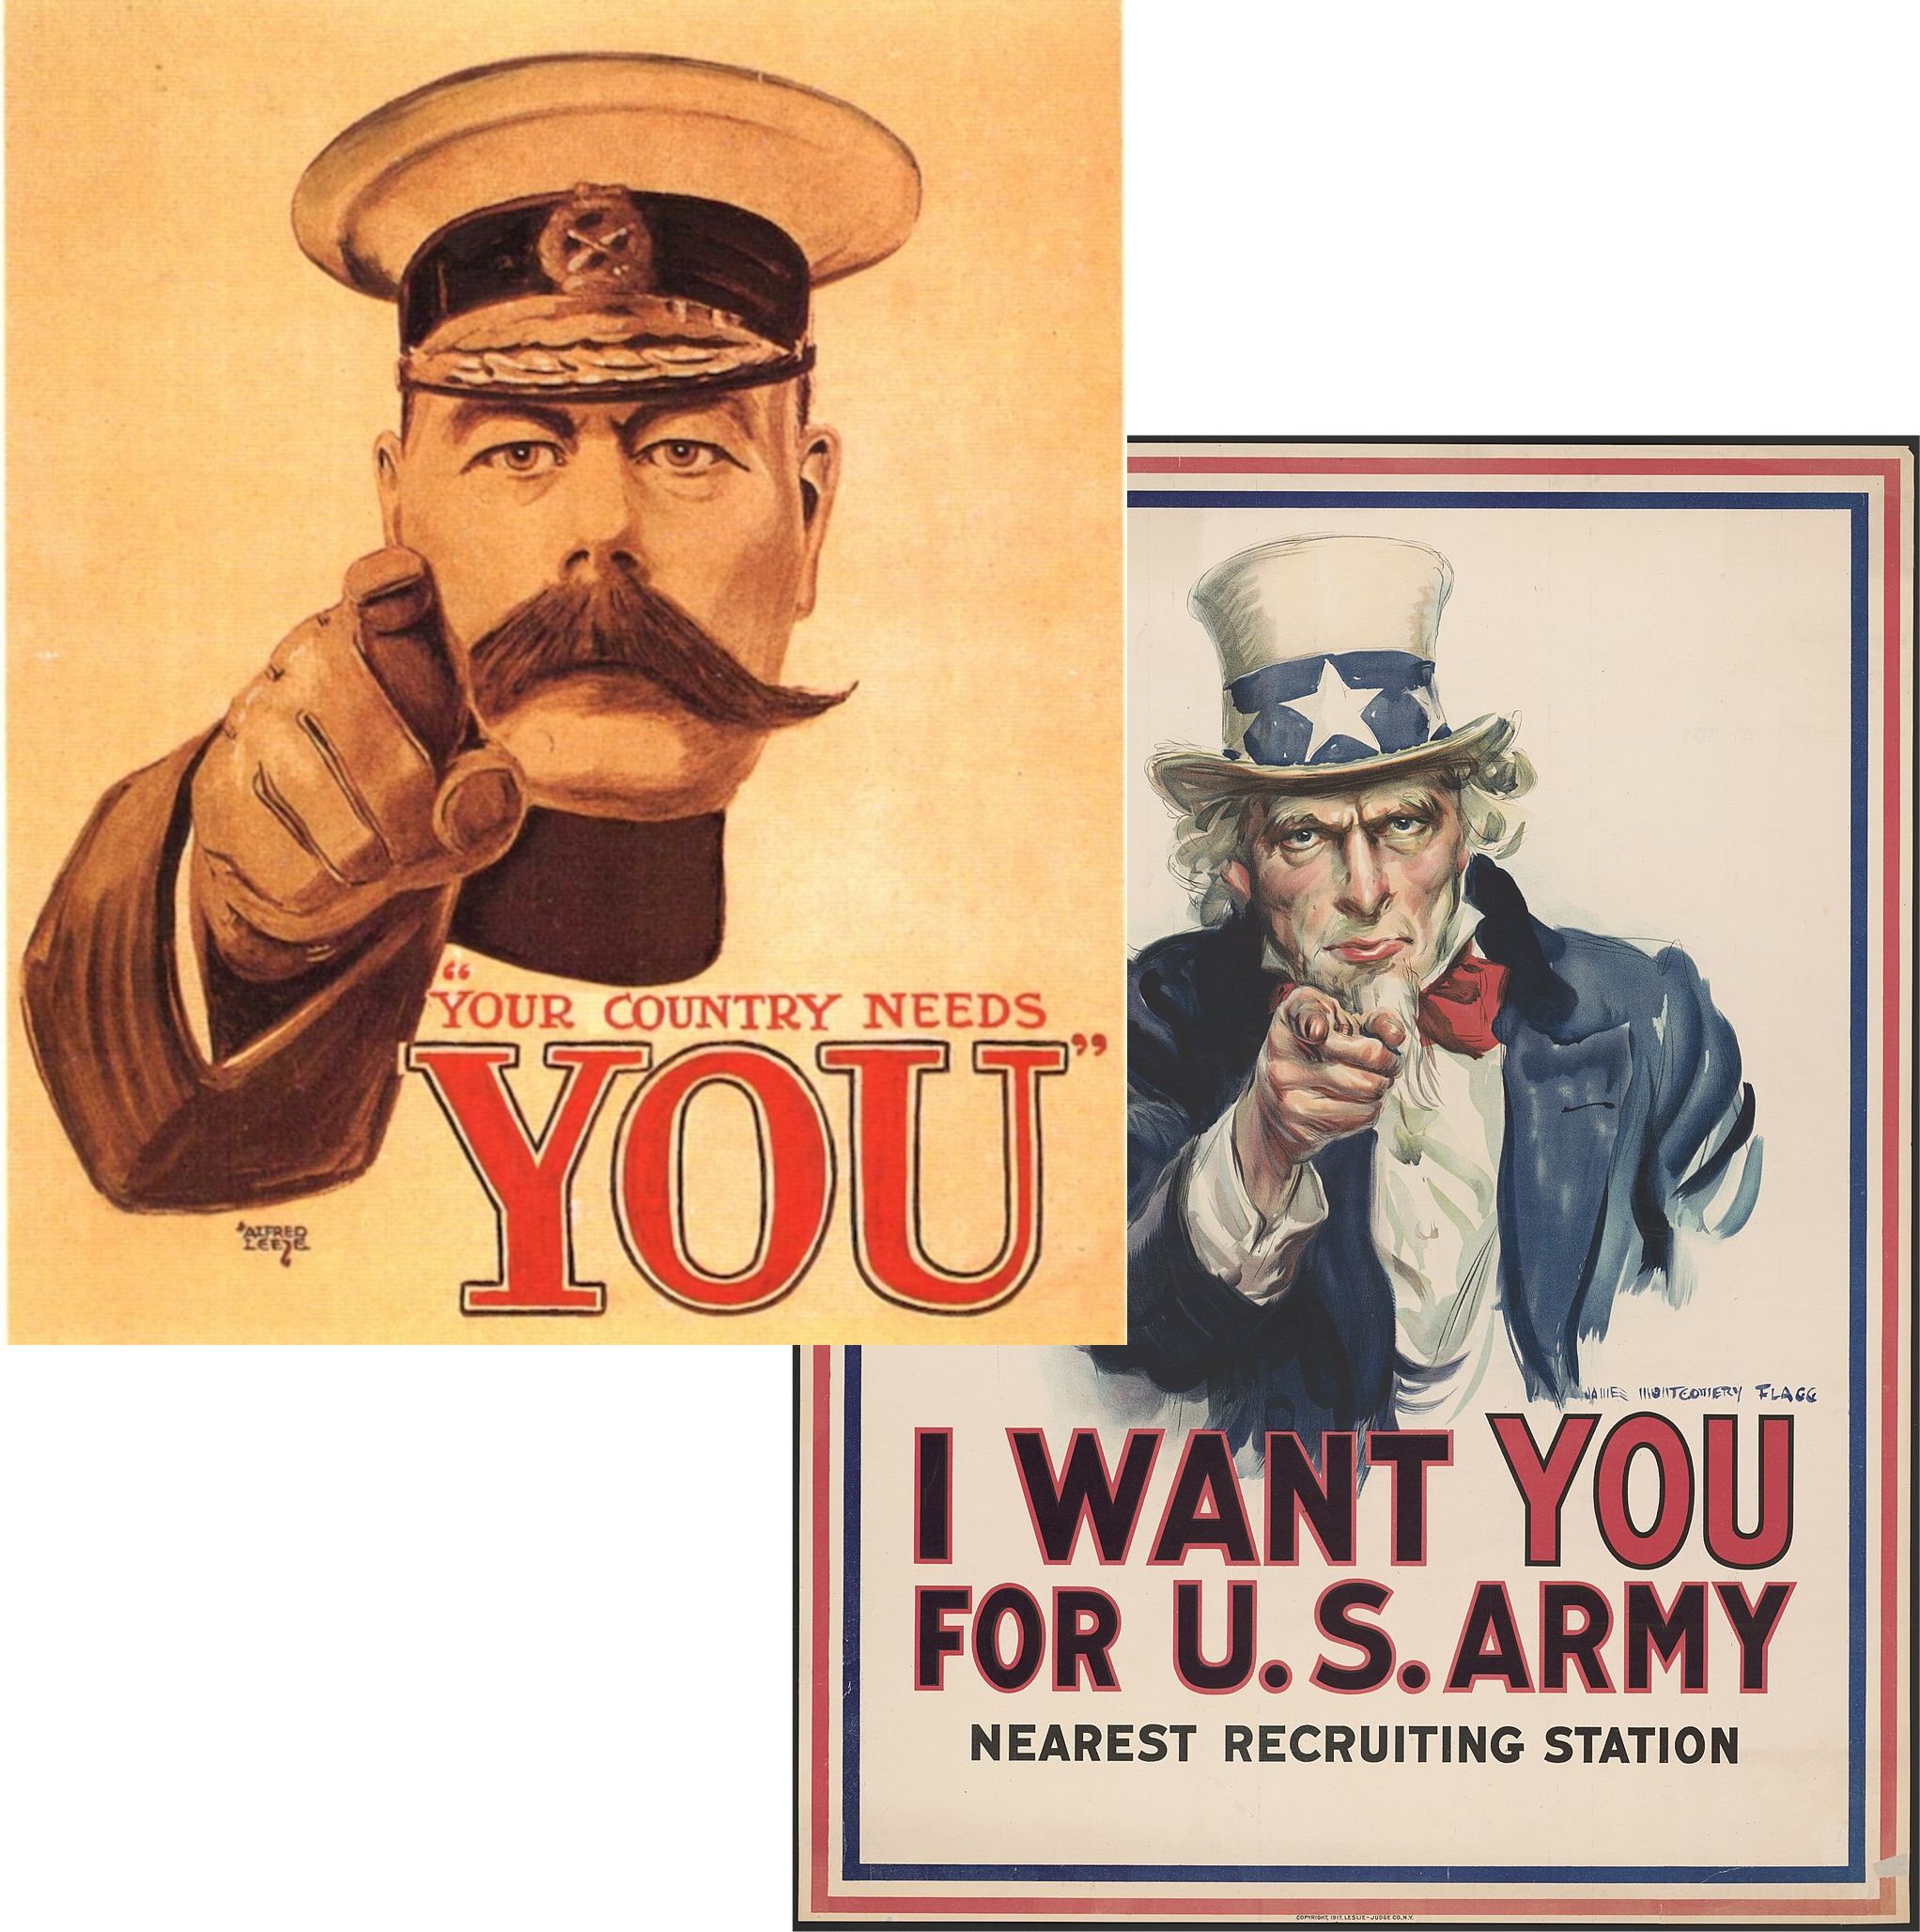 WWI propaganda - Lord Kitchener says Your country wants you and Uncle Sam says I want you for the U.S. Army